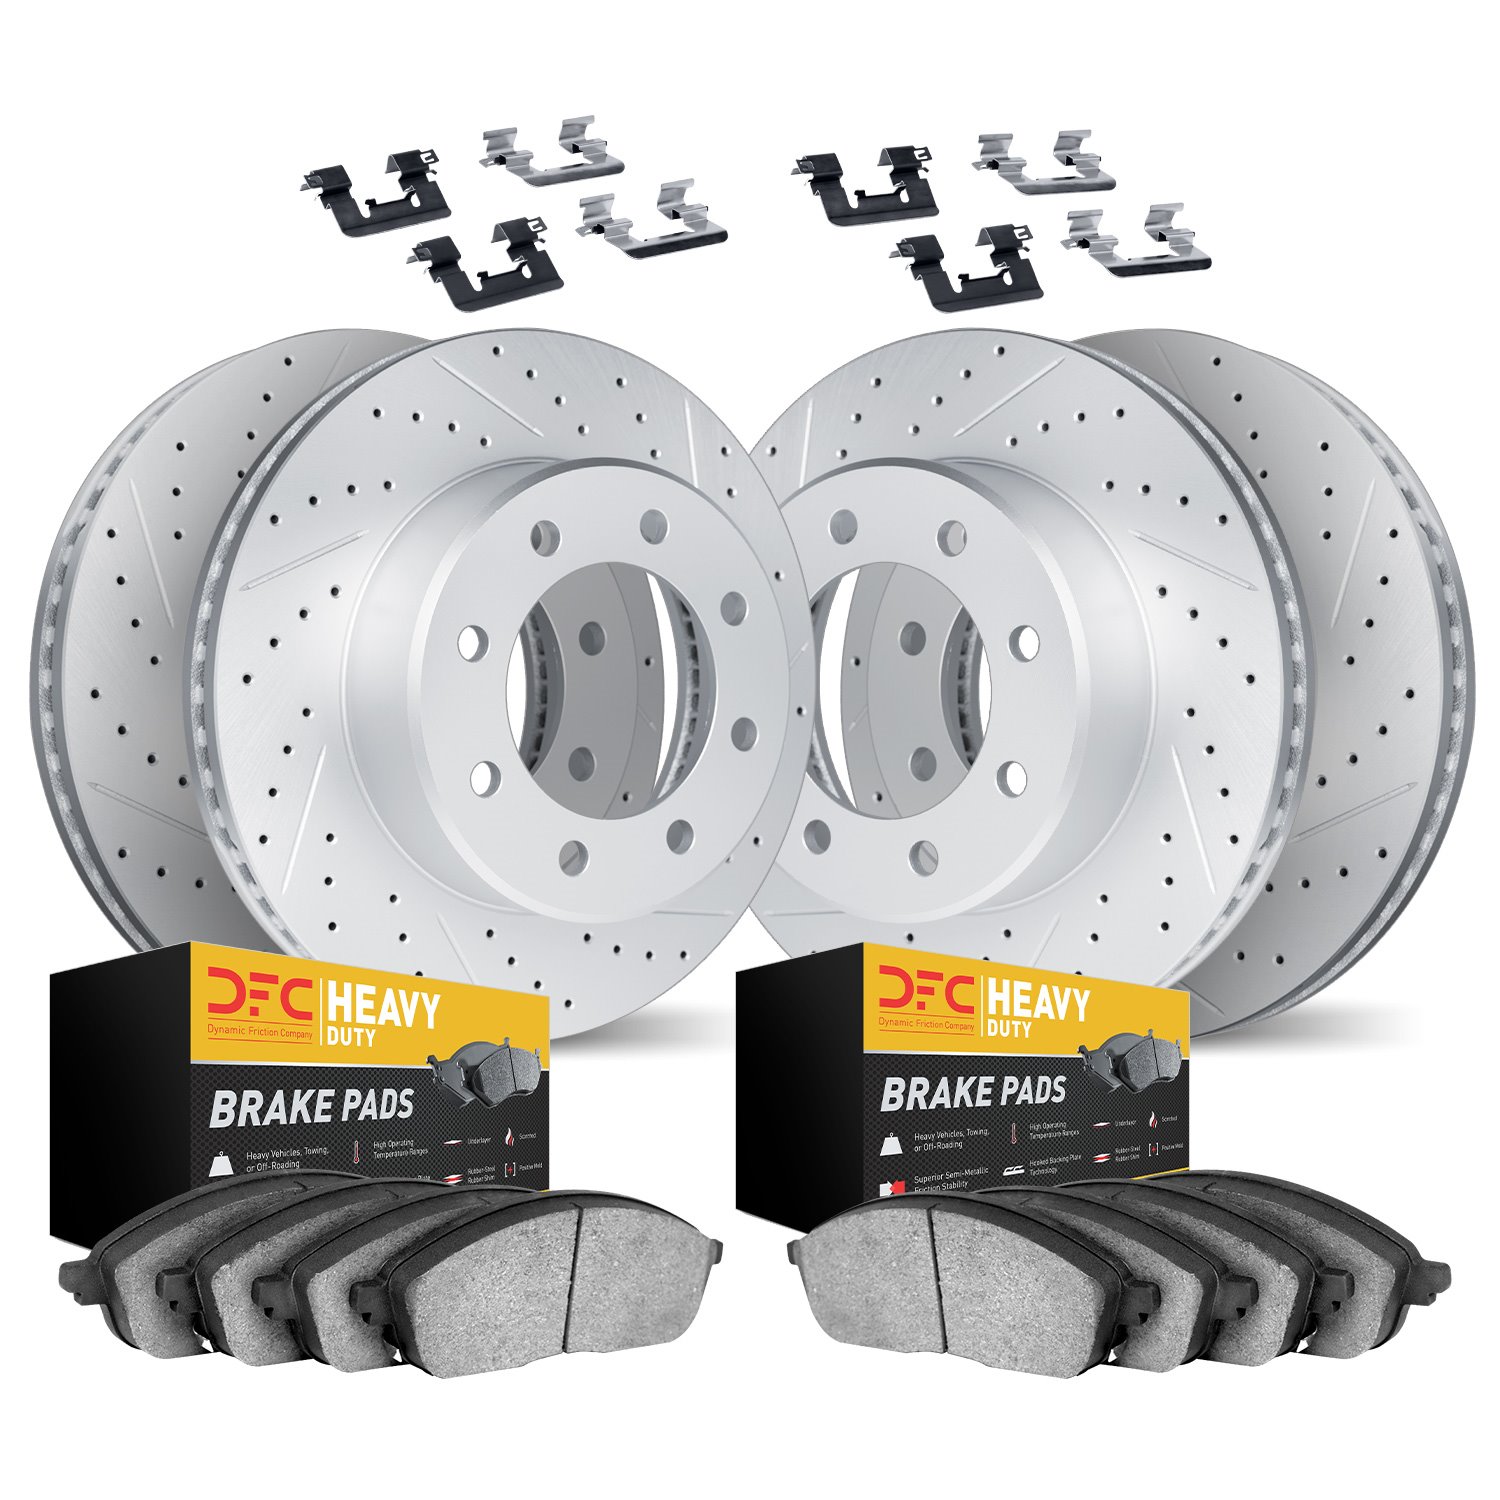 2214-99031 Geoperformance Drilled/Slotted Rotors w/Heavy-Duty Pads Kit & Hardware, 1999-2007 Ford/Lincoln/Mercury/Mazda, Positio